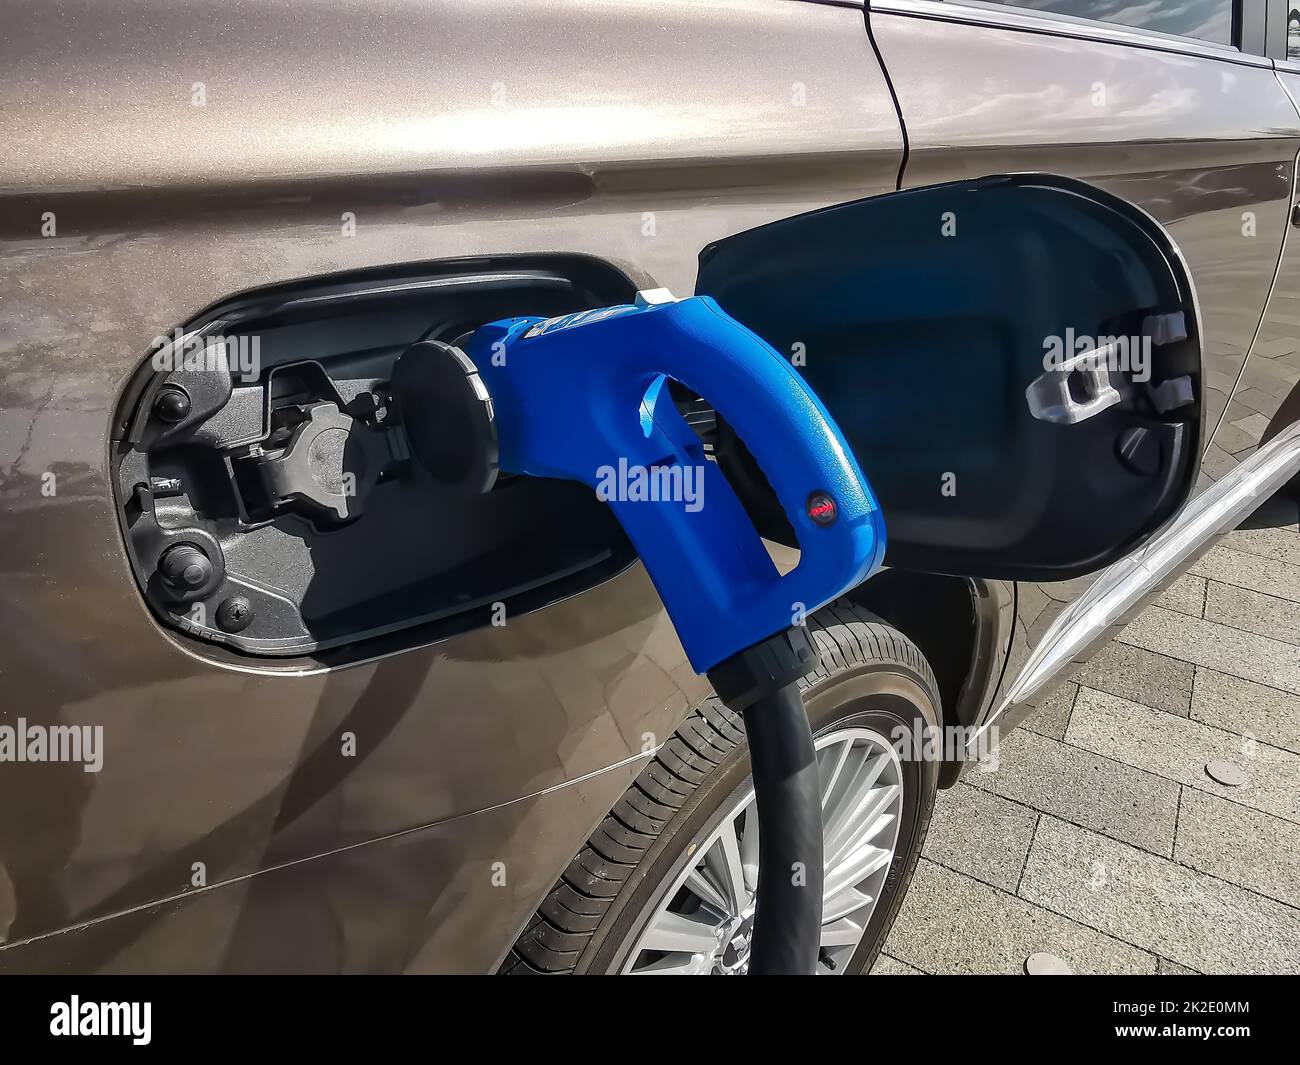 Electric car is refueled. Picture shows an electro connector and car in detail with the tank cap open Stock Photo